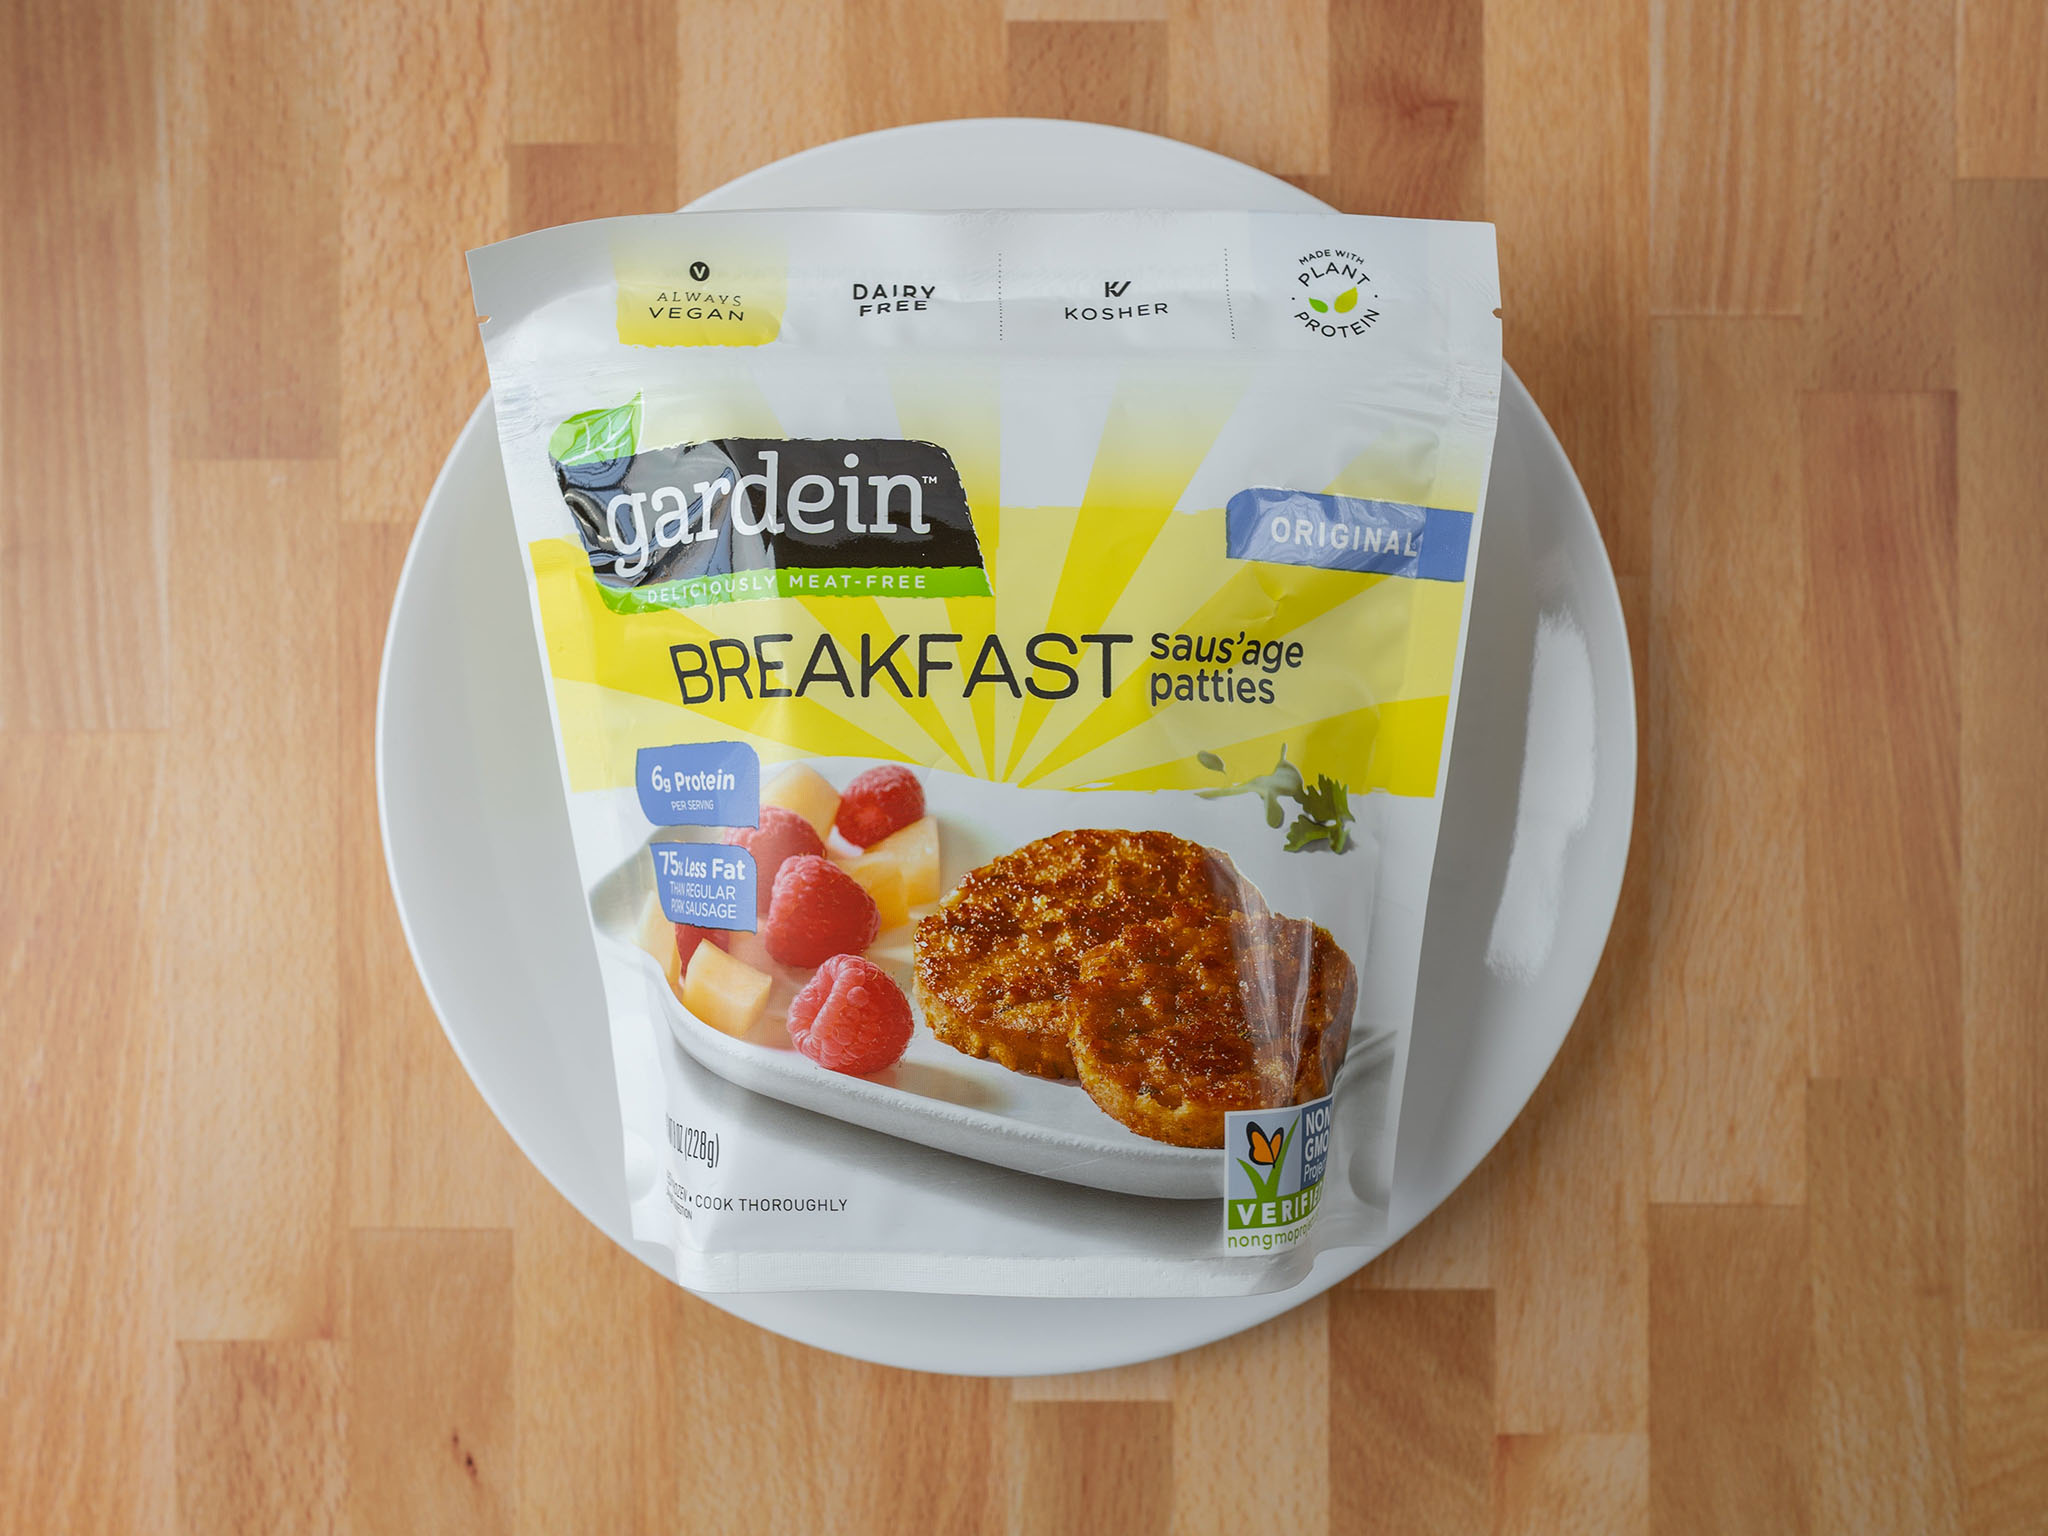 How to air fry Gardein Breakfast Saus’age patties – Air Fry Guide